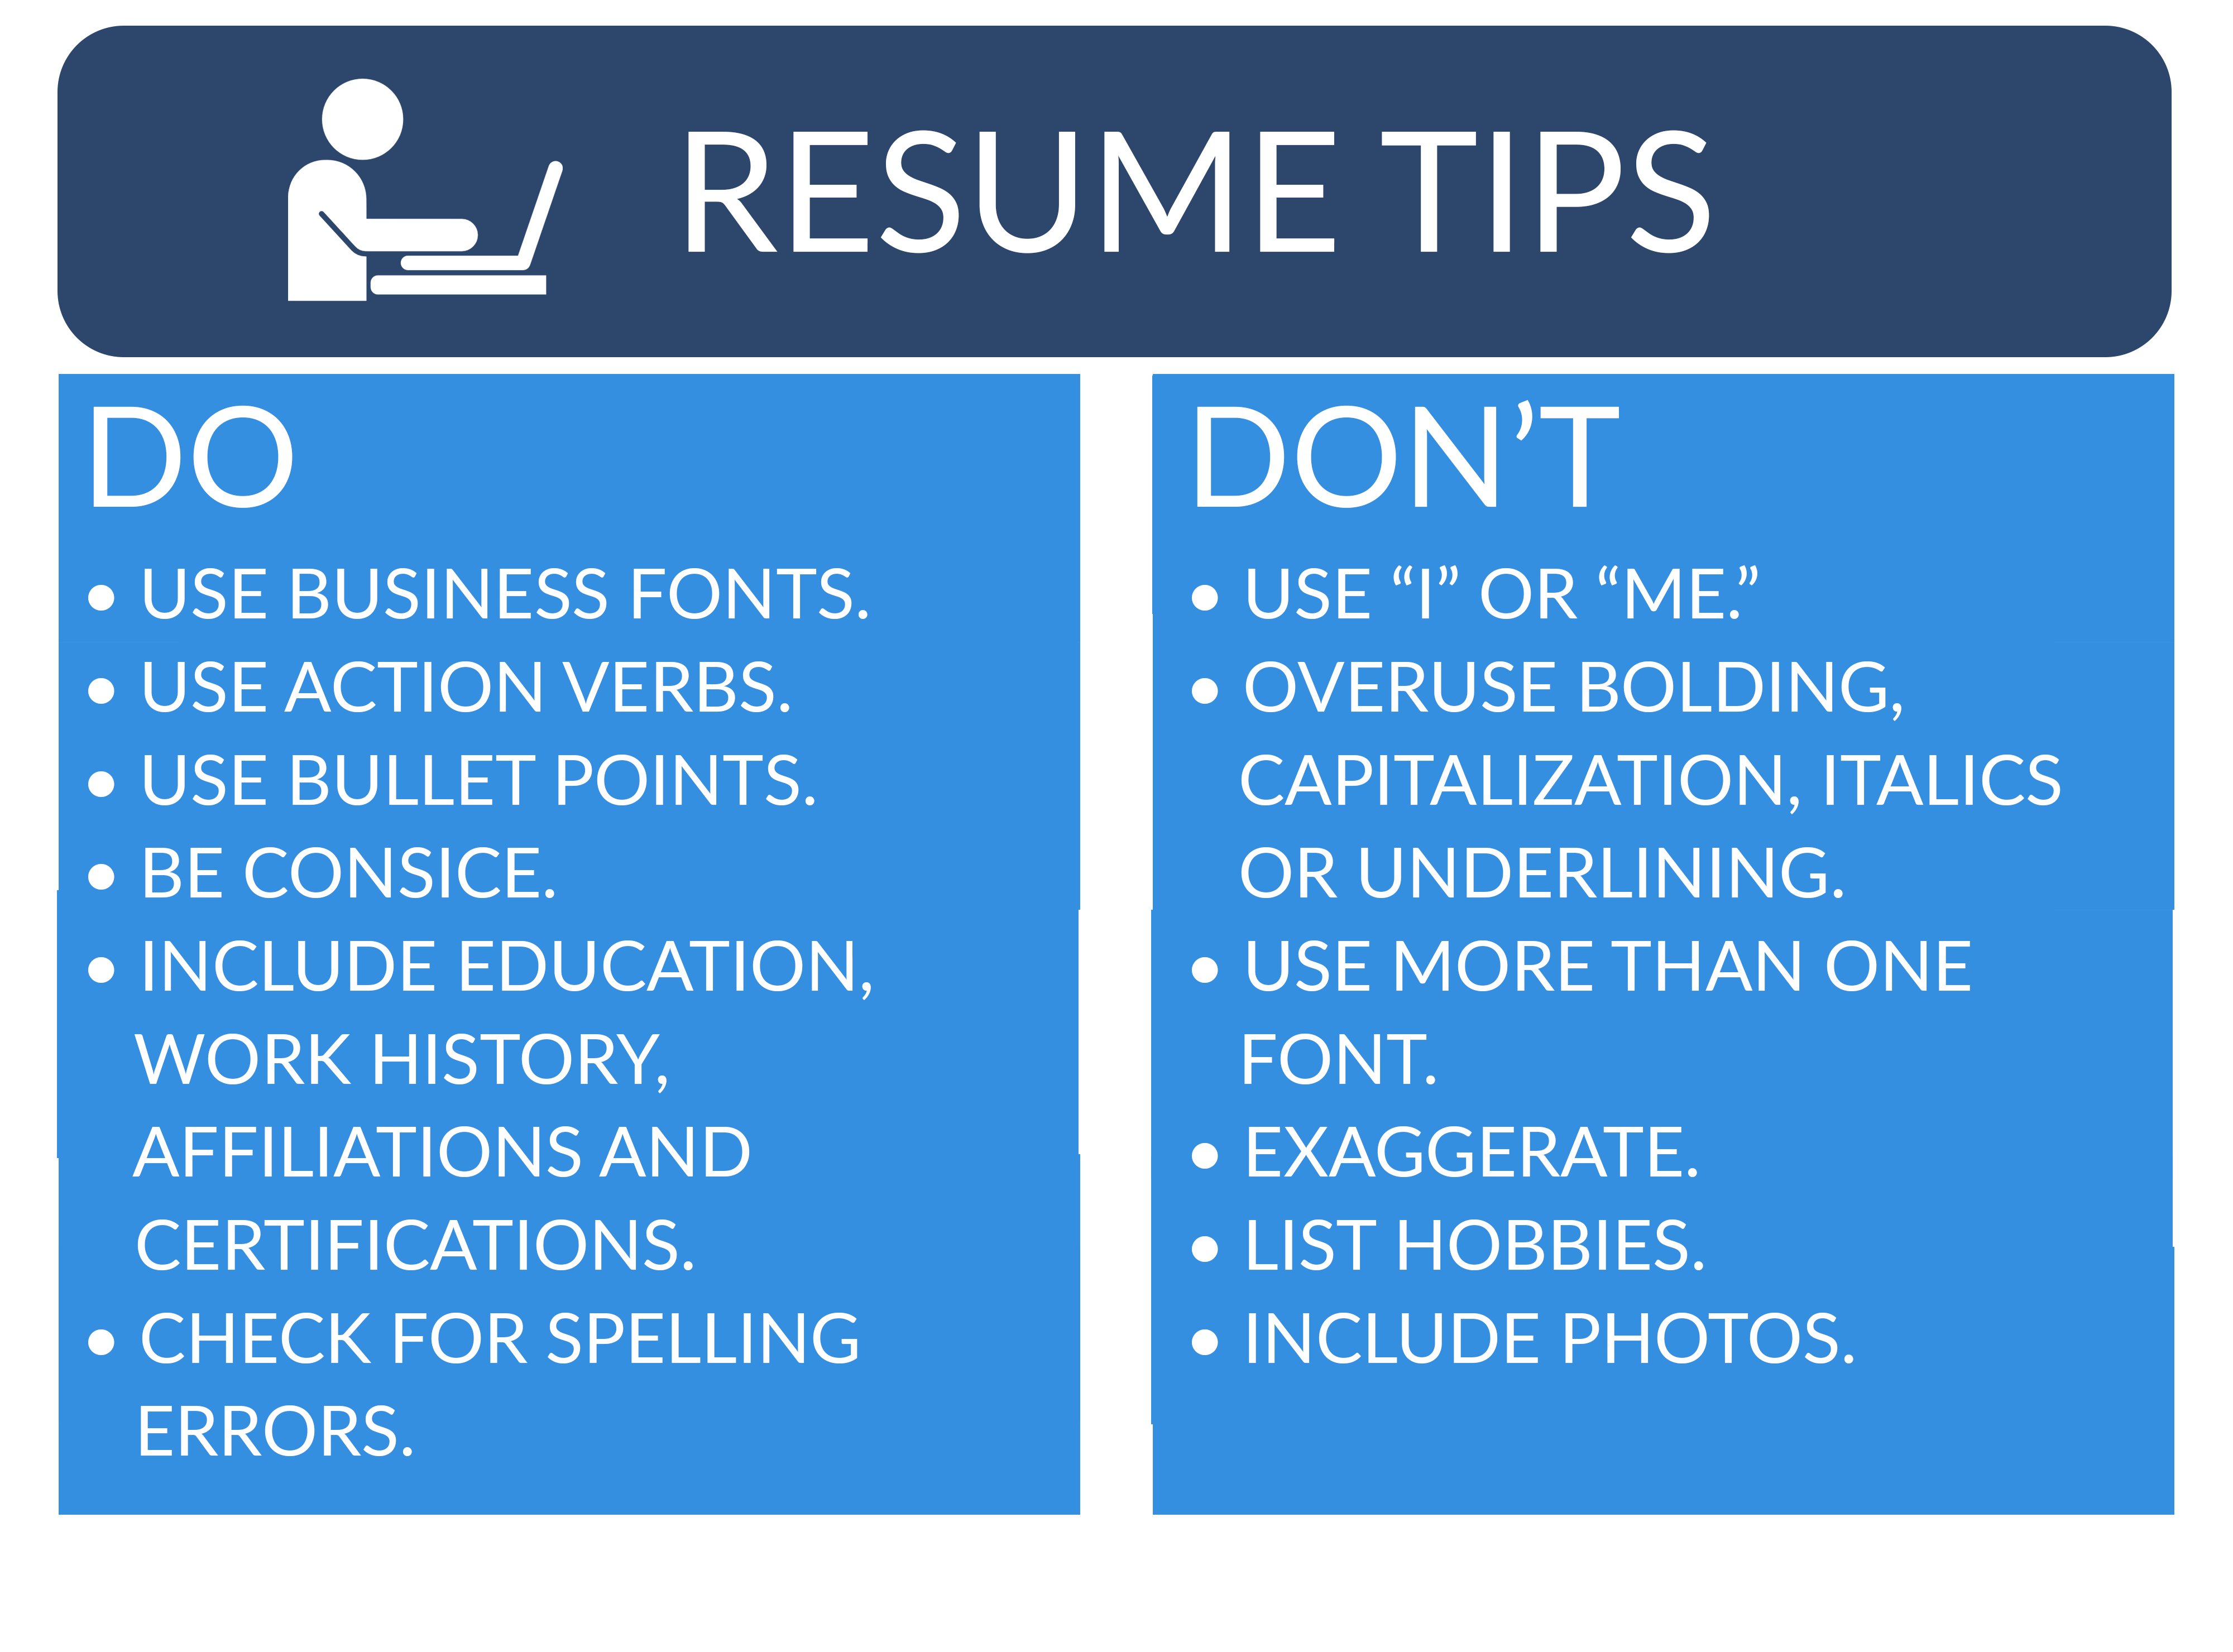 What Can You Do To Save Your resume From Destruction By Social Media?